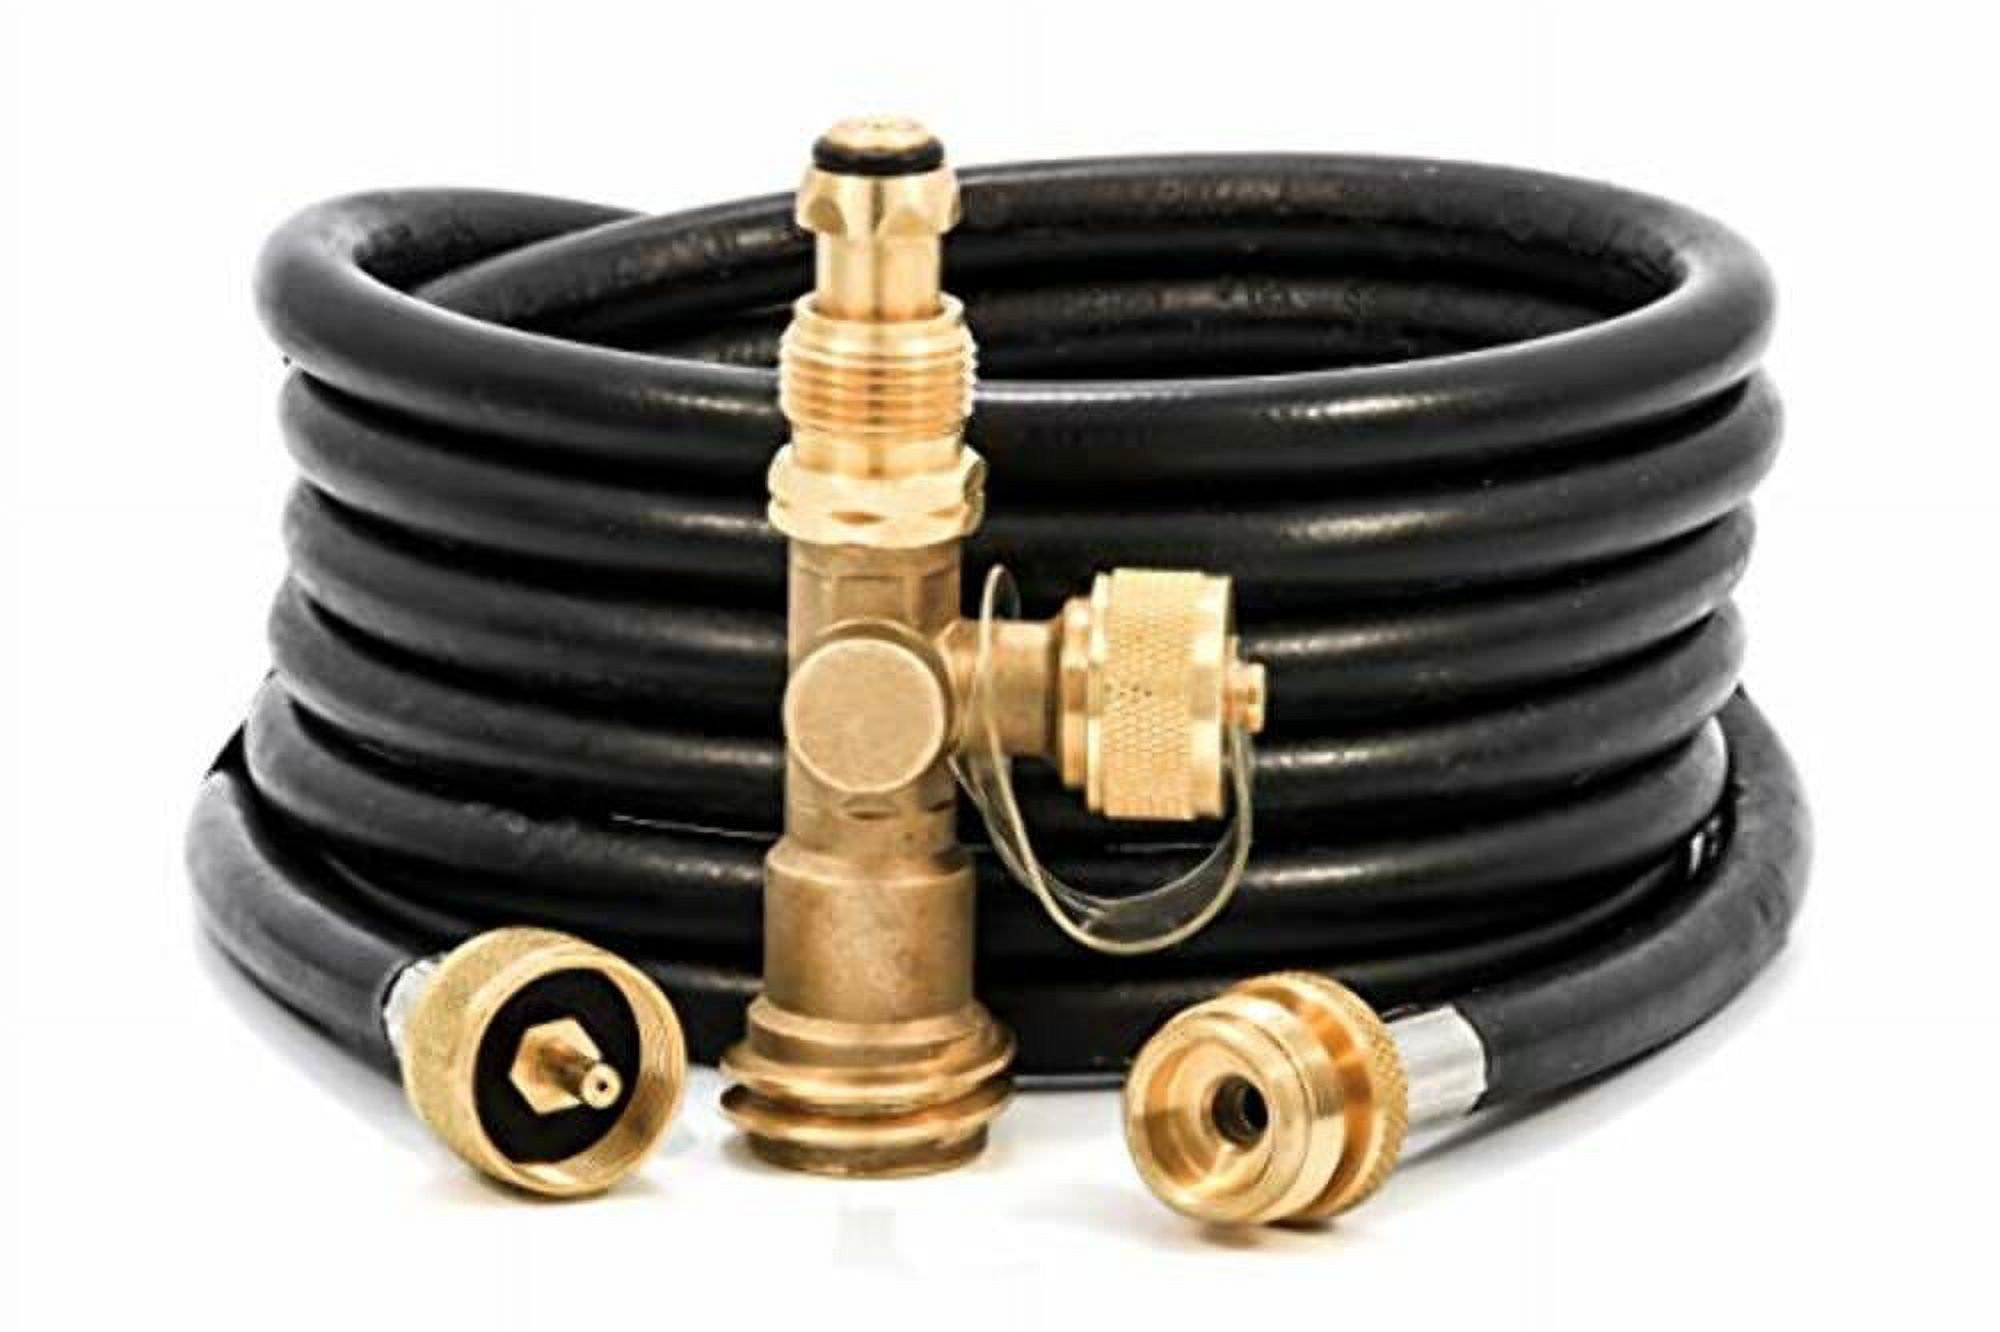 Camco Camper/RV Propane 3-Port Brass Tee with 12-Ft Propane Hose | Includes a Female POL, Excess Flow Soft Nose POL & 1"-20 Male Throwaway Cylinder Thread (59103) - image 2 of 10